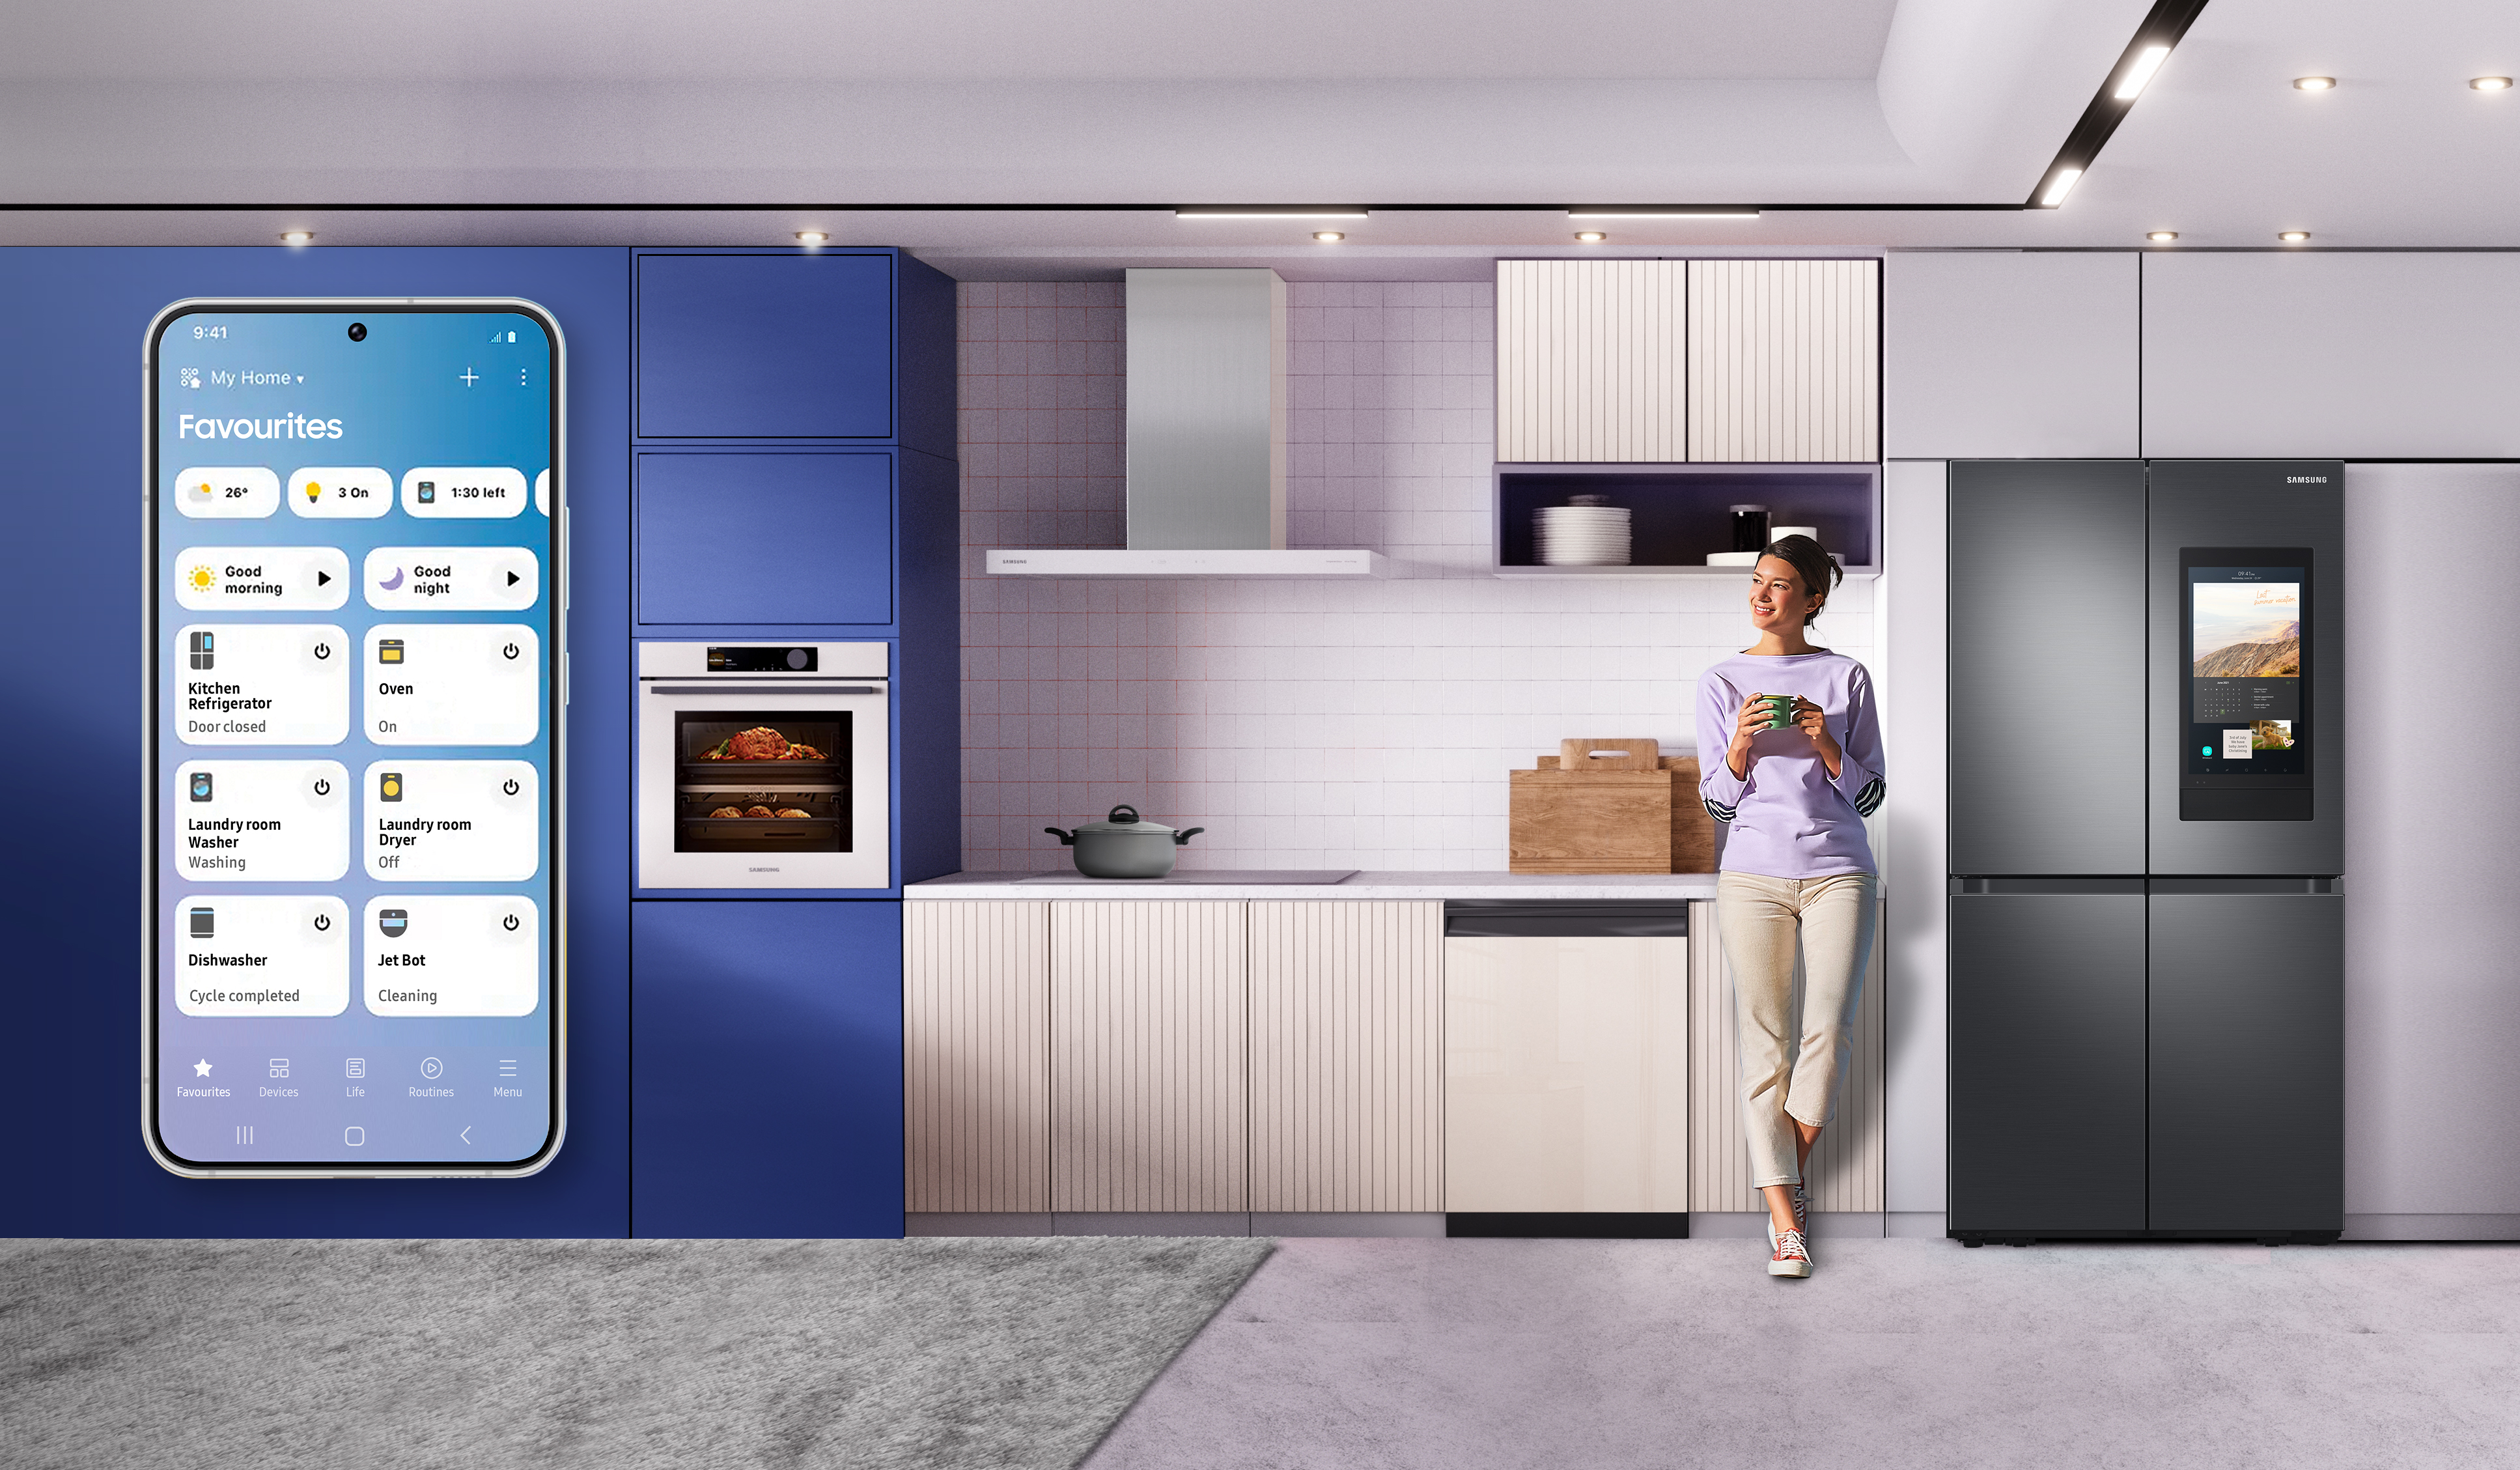 Manage your Bespoke kitchen appliances and cook efficiently with a smart kitchen.